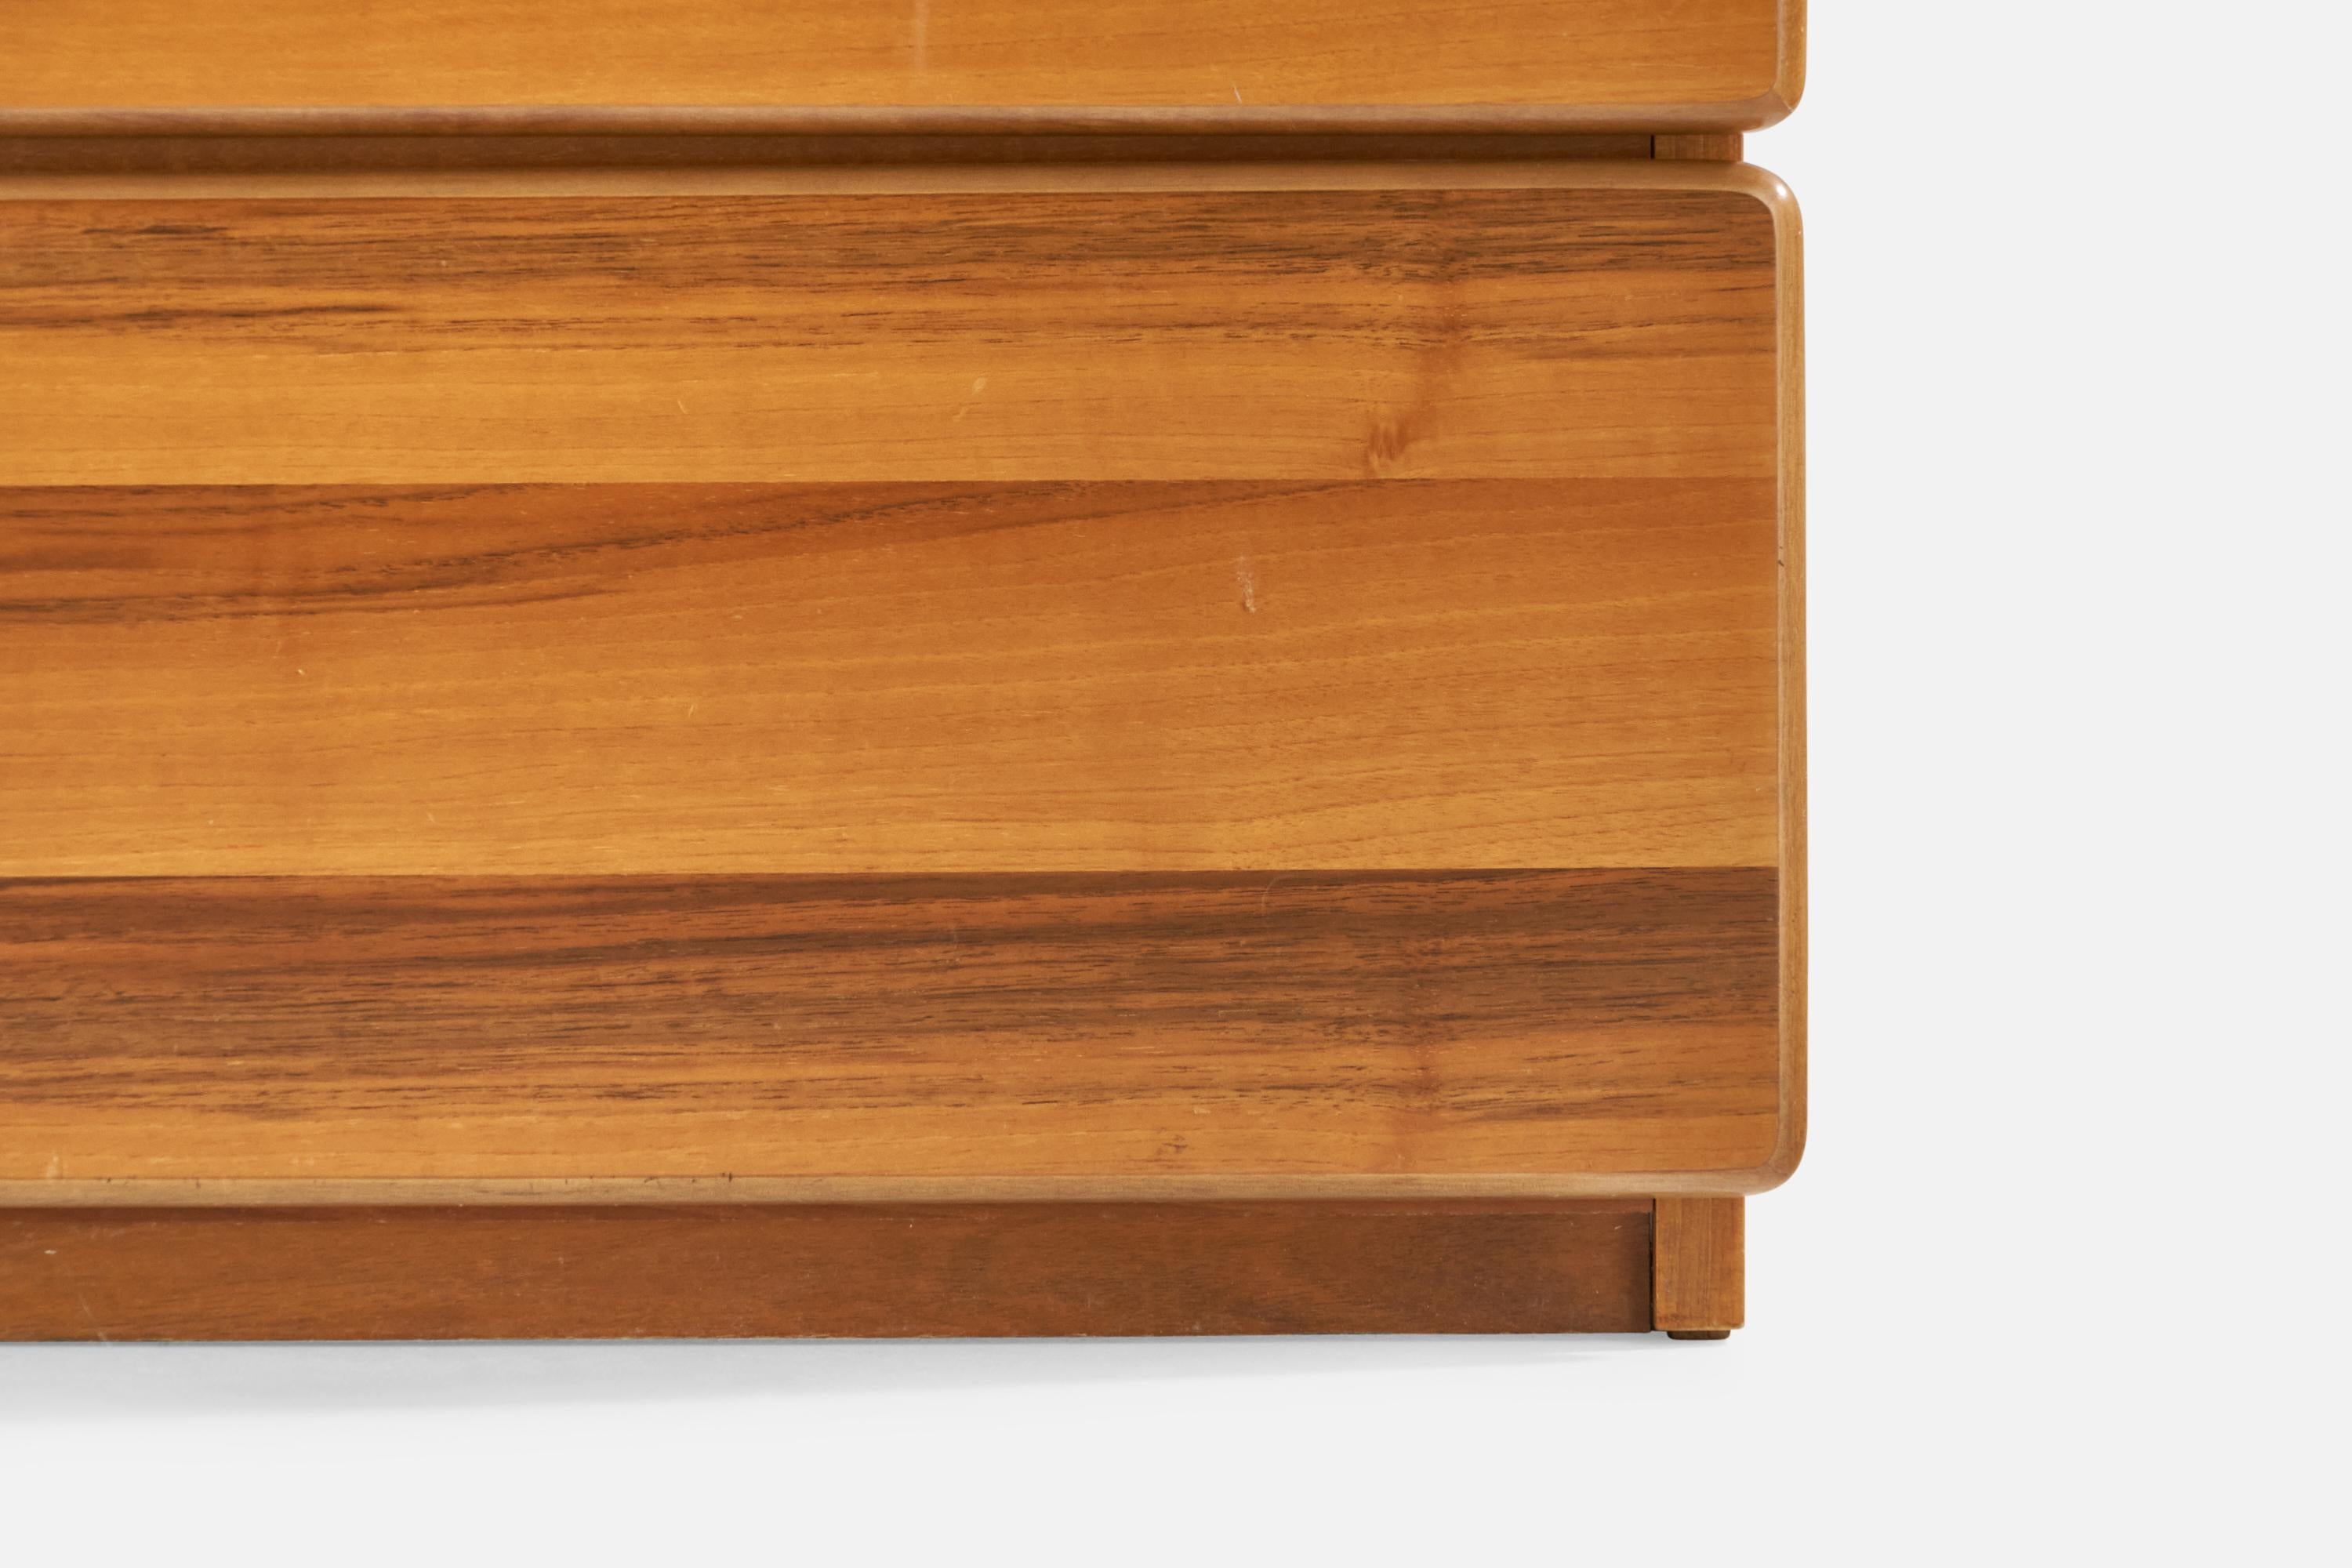 Mobilgirgi, Chest of Drawers, Spalting Wood, Italy, 1970s For Sale 2